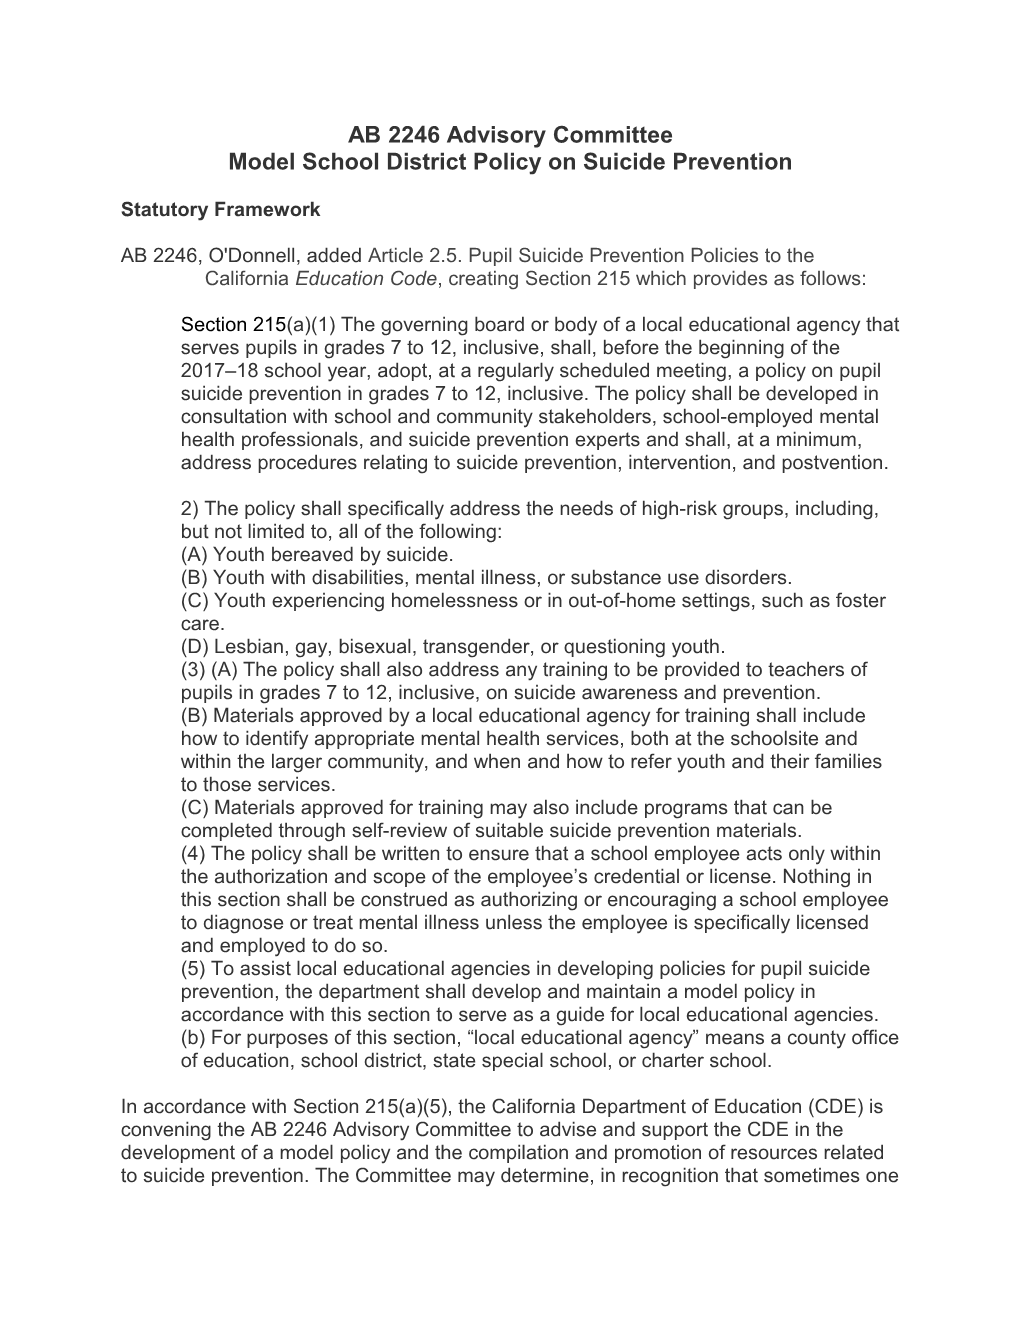 Model School District Policy on Suicide Prevention